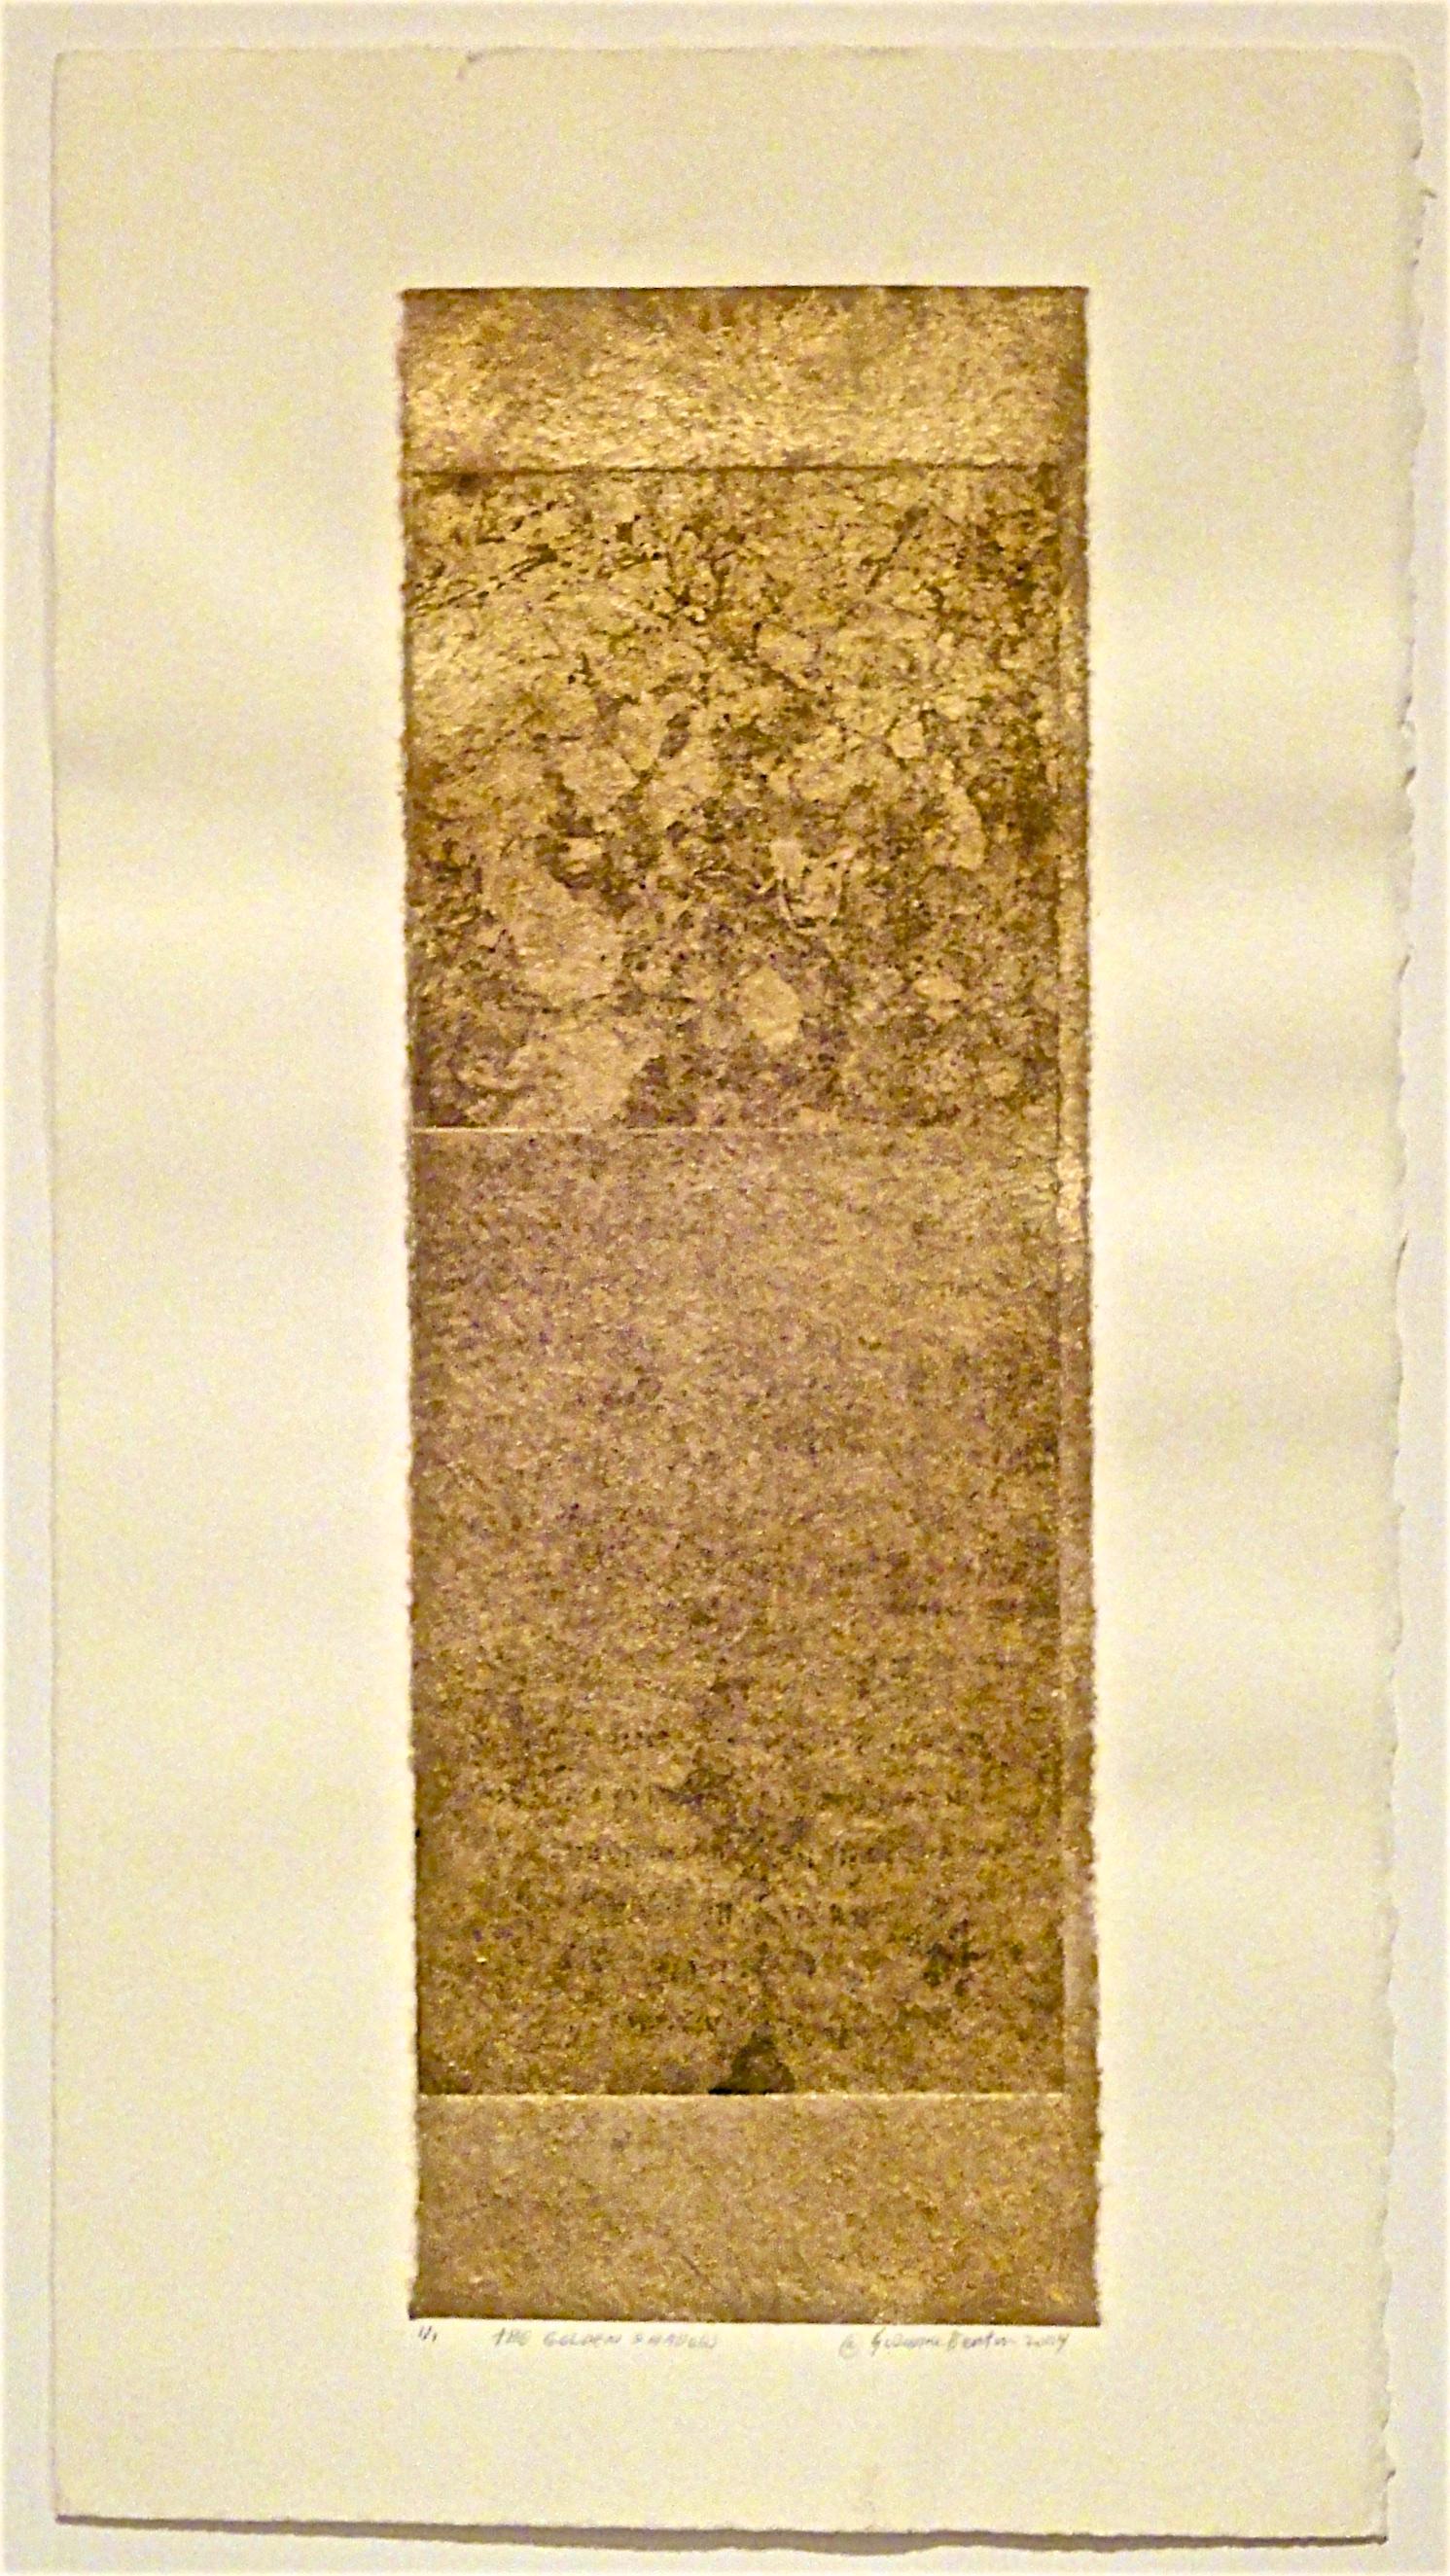 Suzanne Benton_The Golden Shadow_2004_ etching with chine colle__ 12 x 4 inches